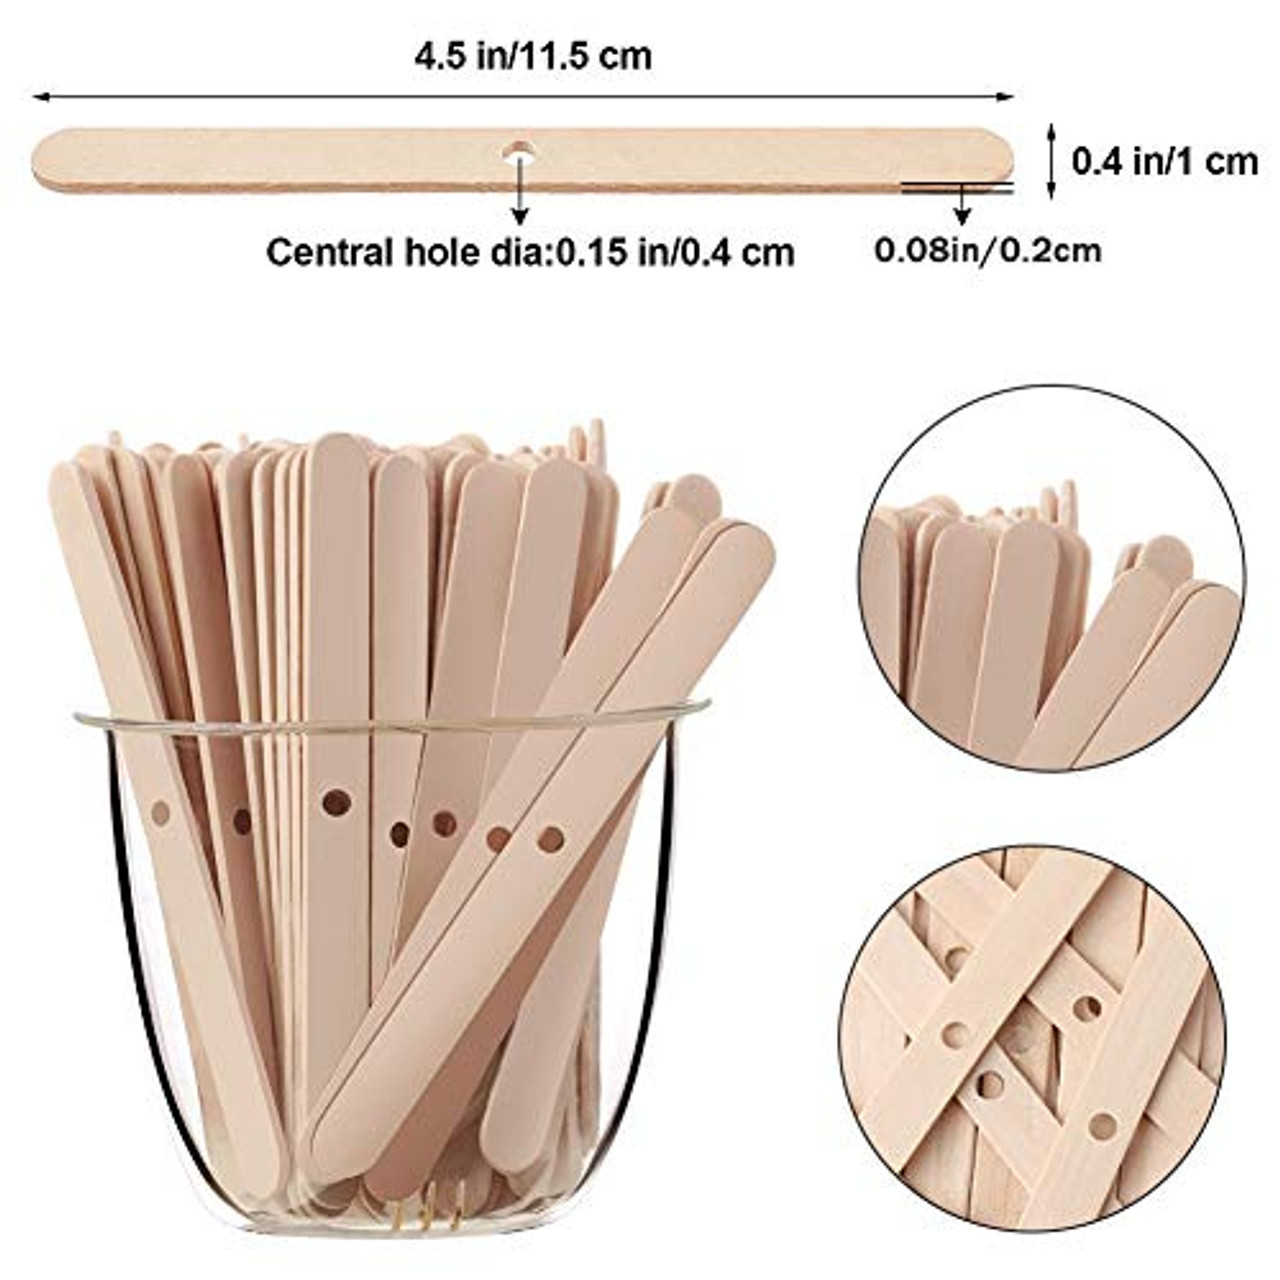 Wooden Candle Wick Holders, 50pcs Wooden Candle Wick Holders